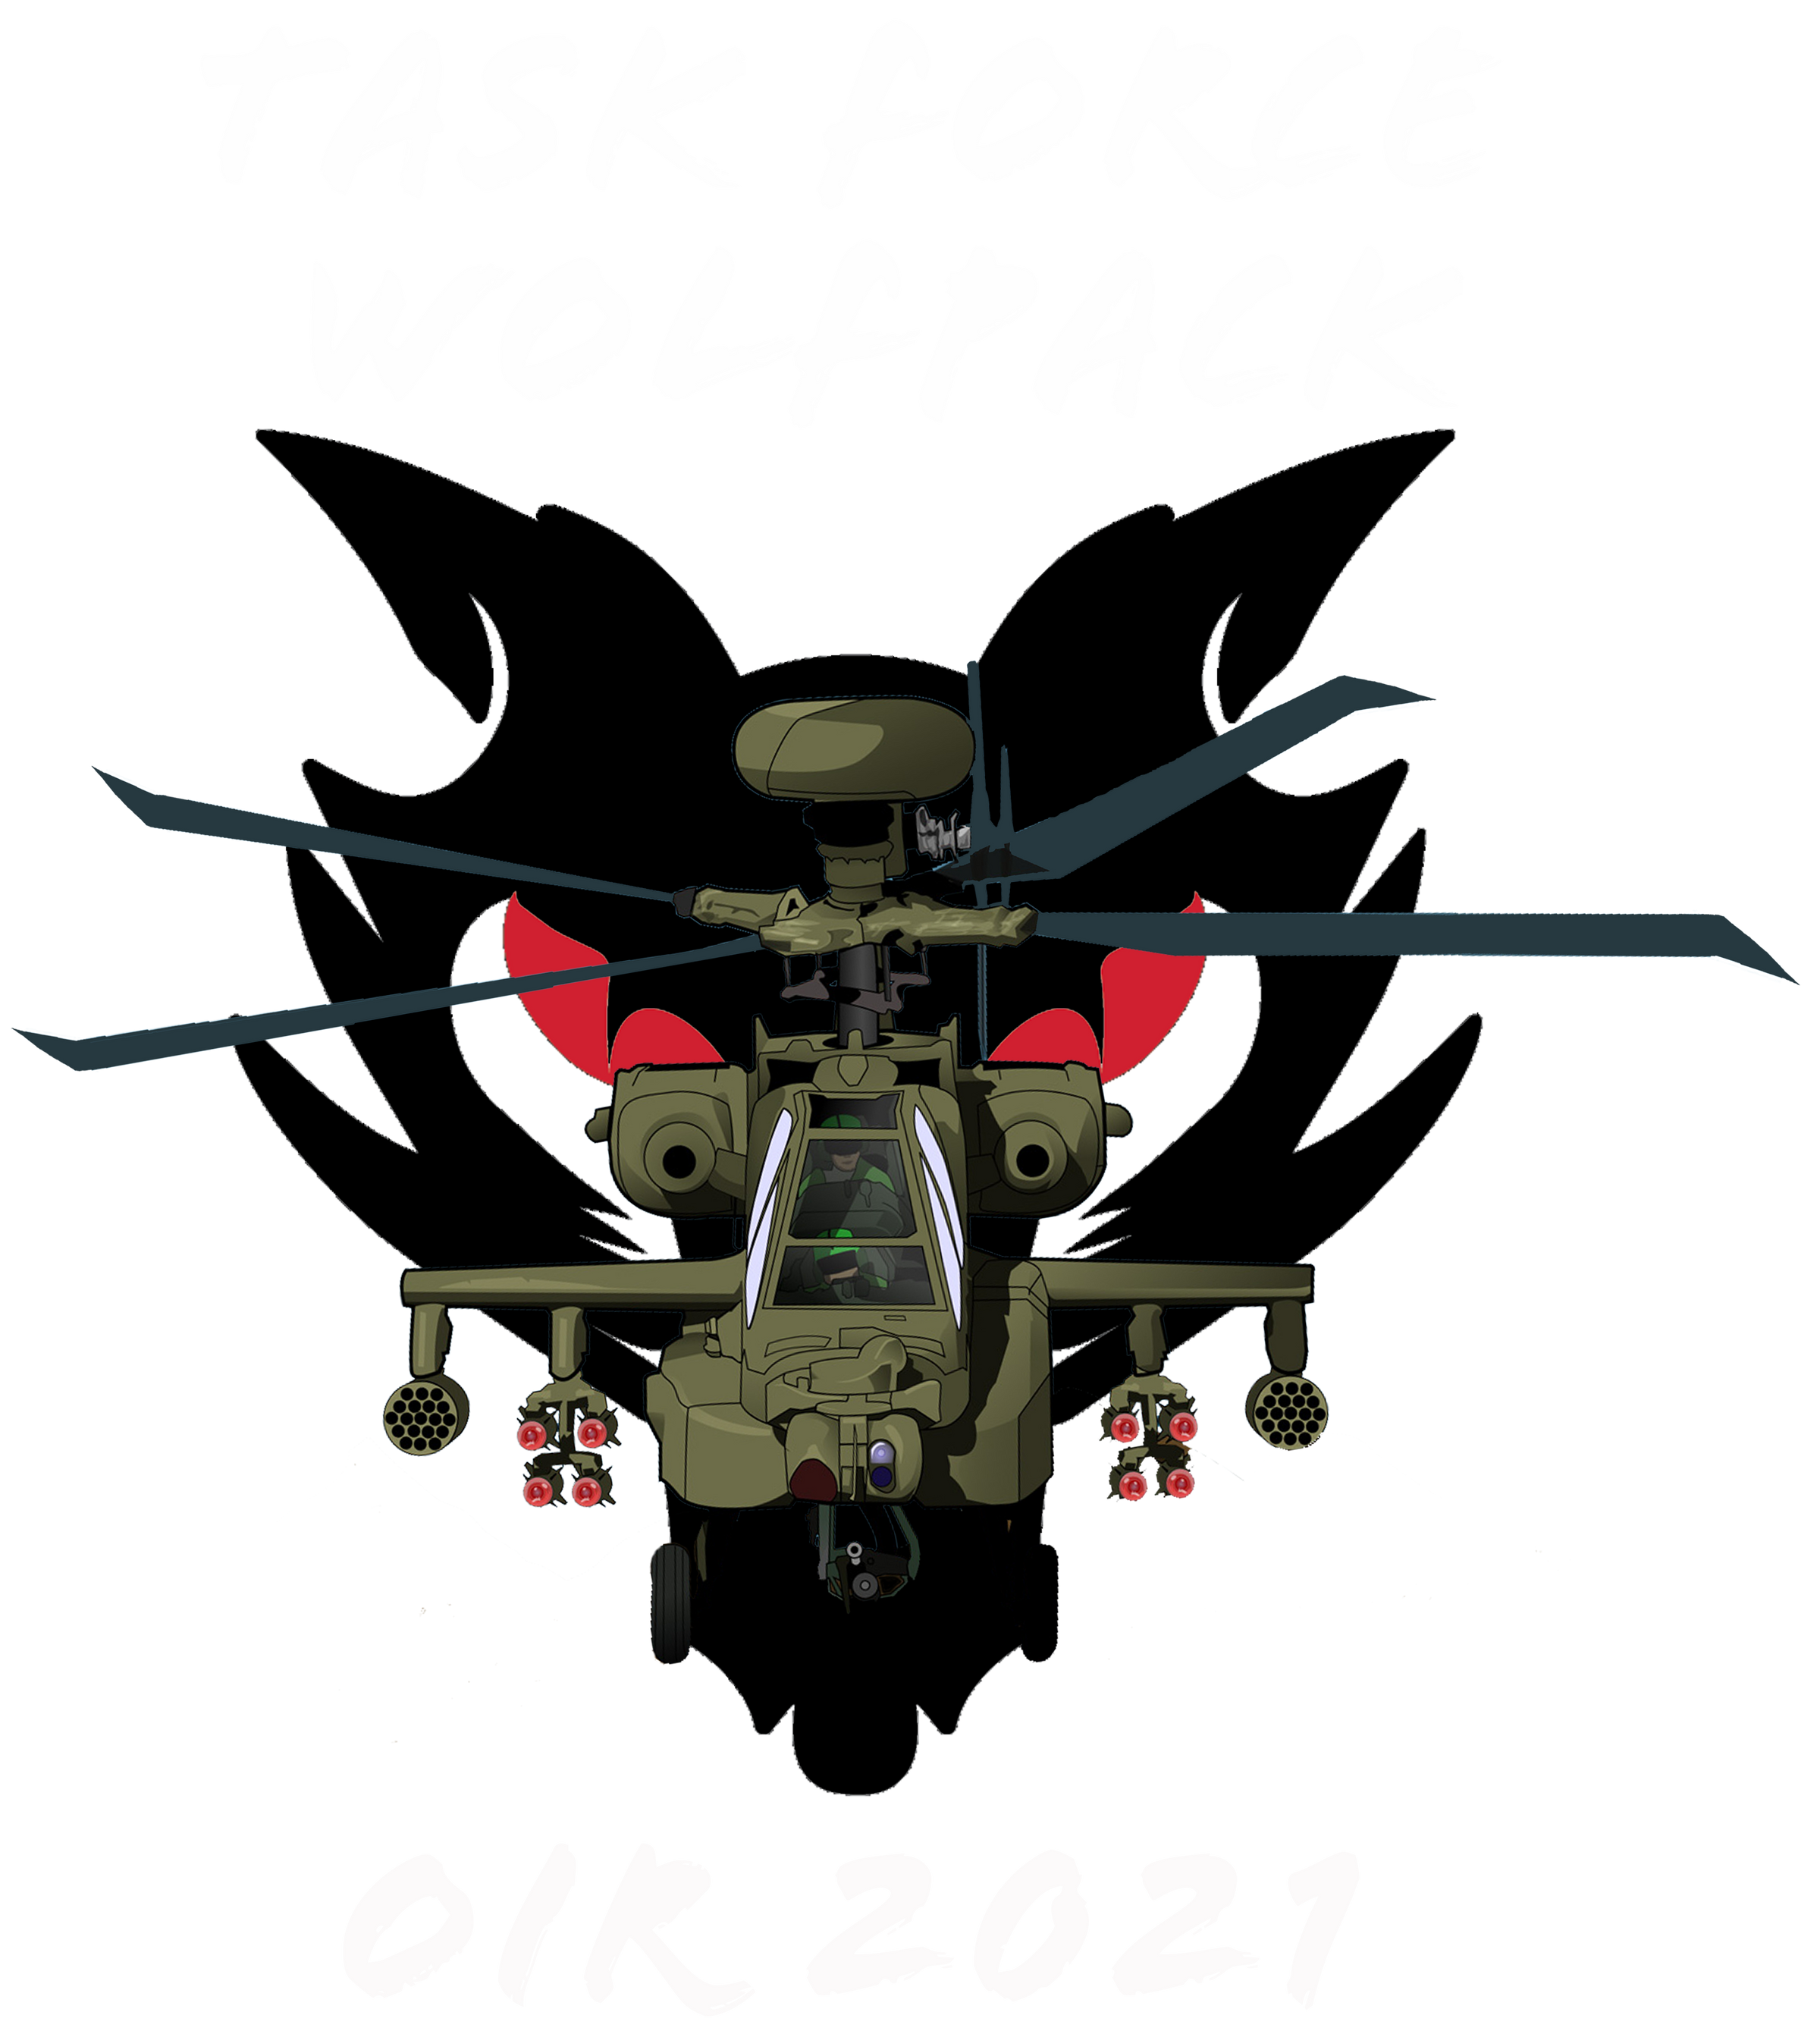 1-82 Attack TF Wolfpack